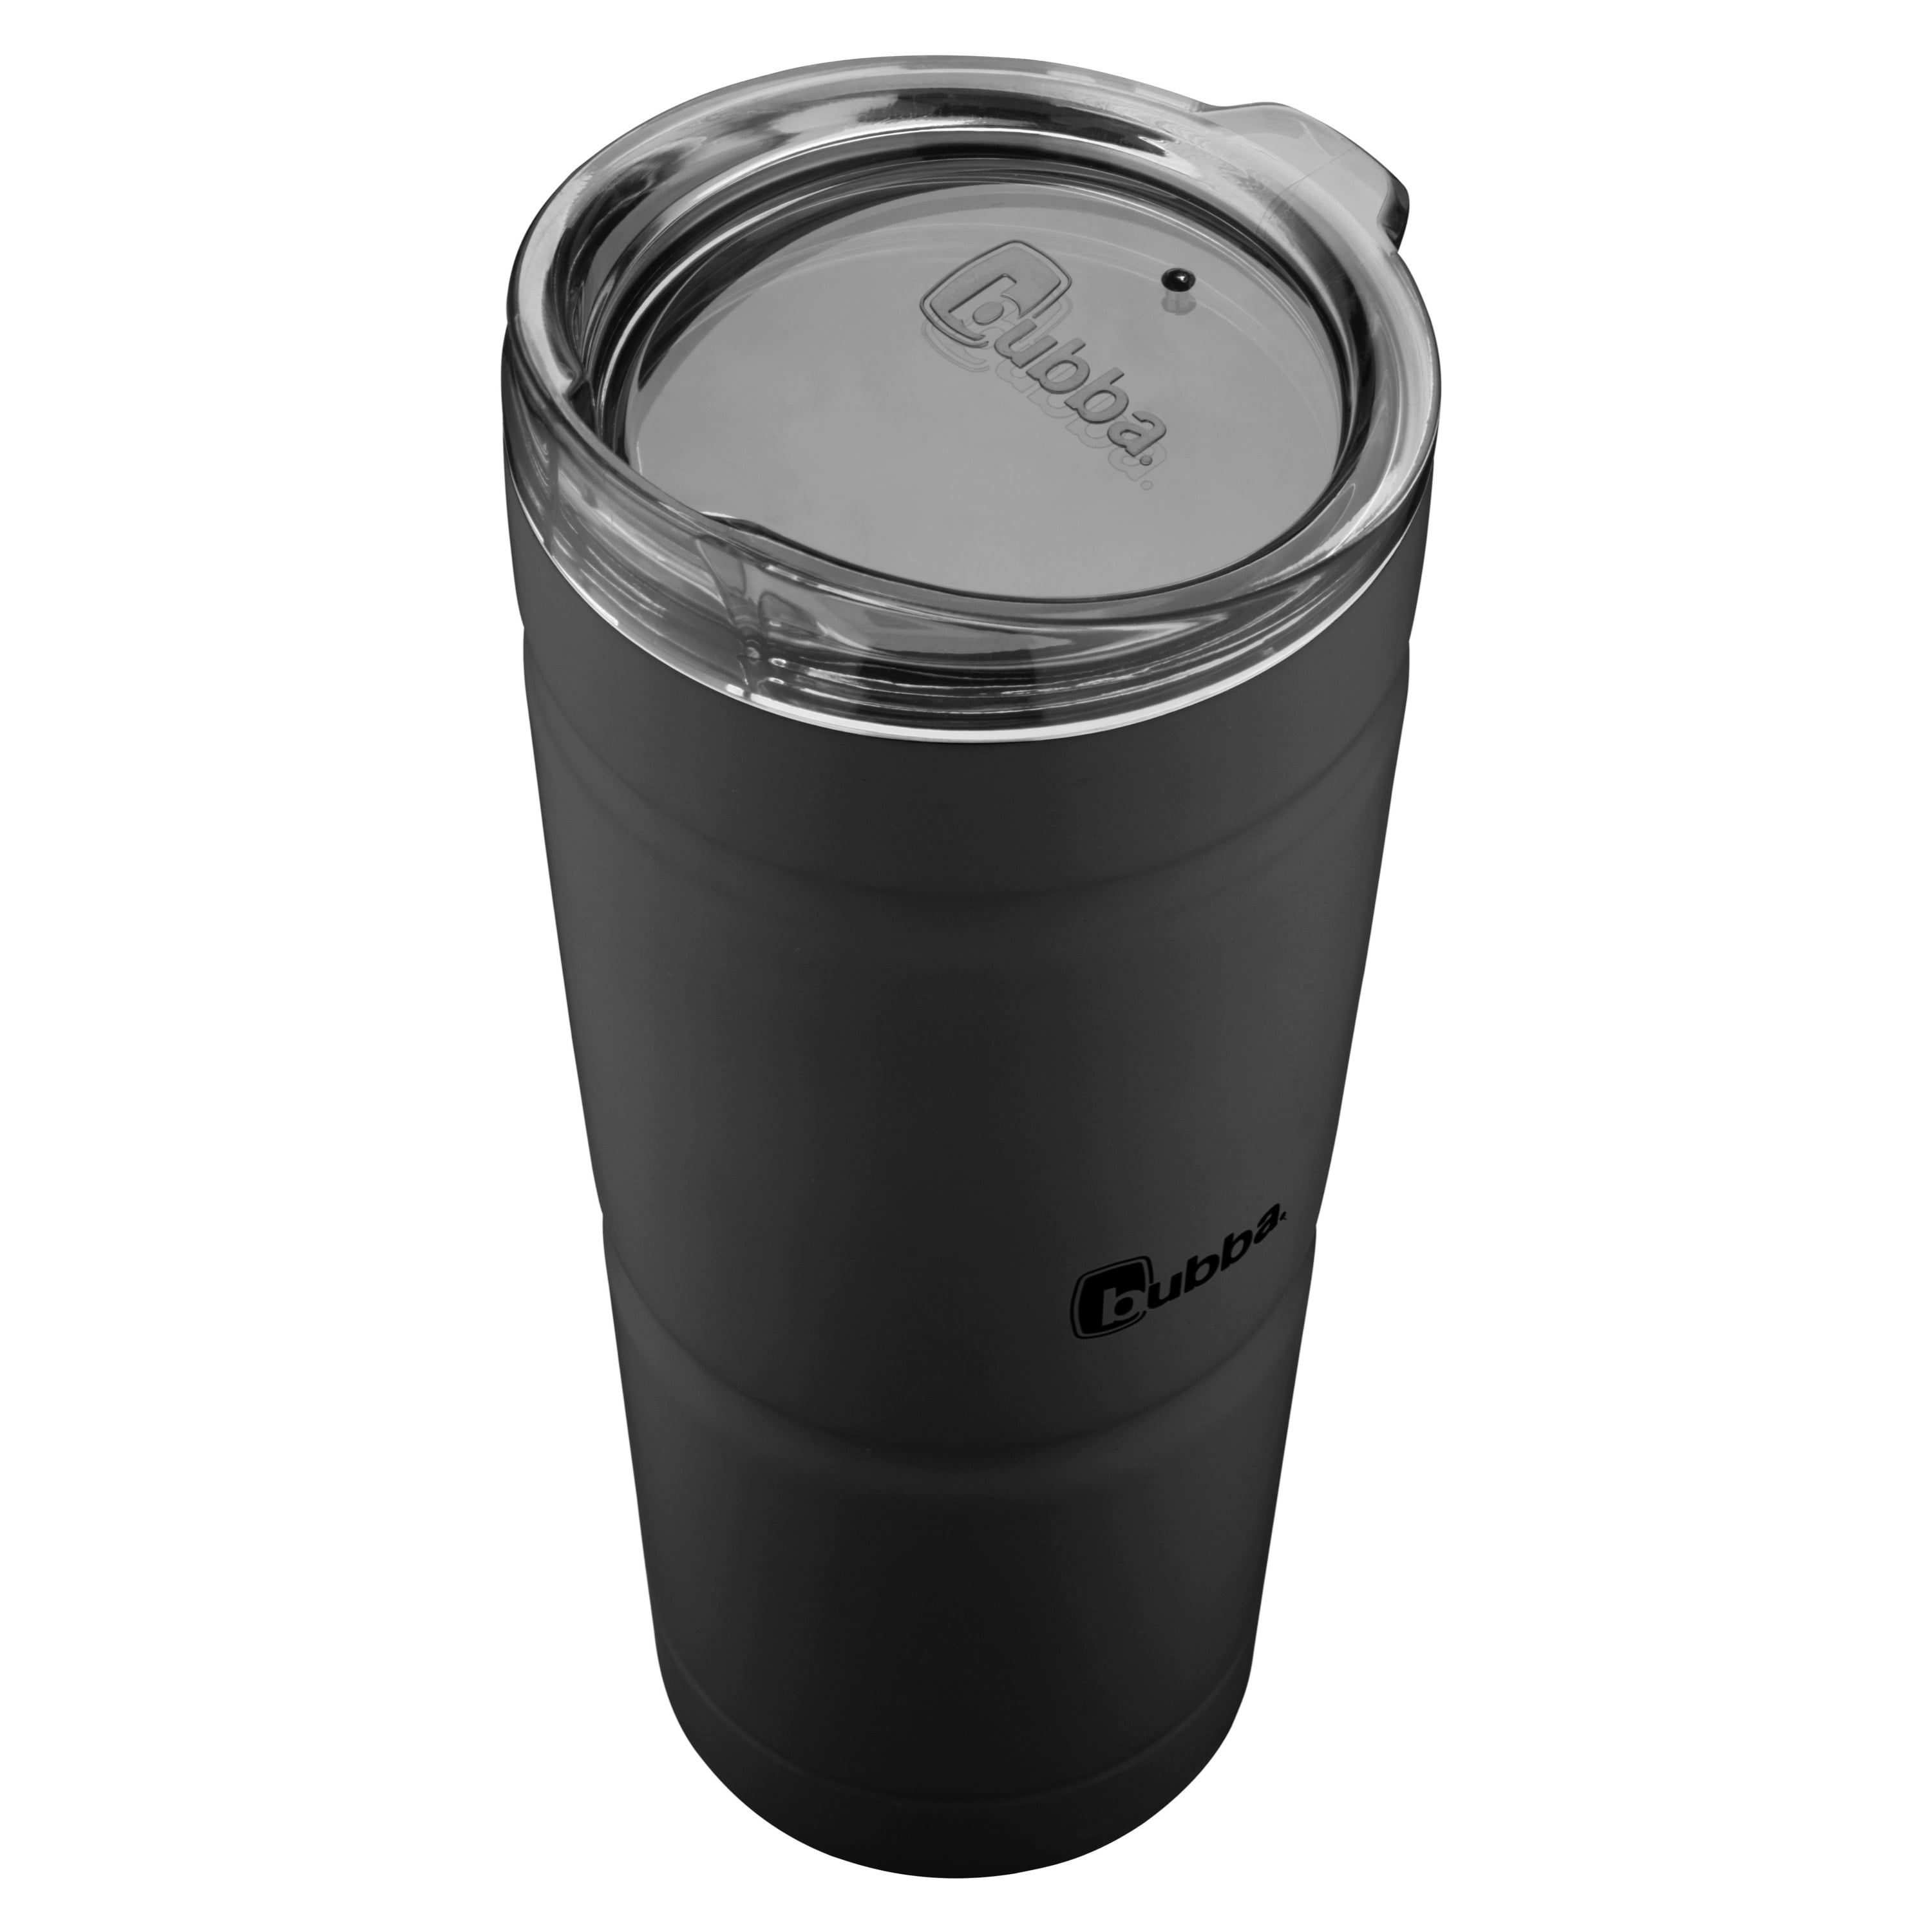 bubba Envy S Stainless Steel Tumbler with Handle in Black, 32 fl oz. 